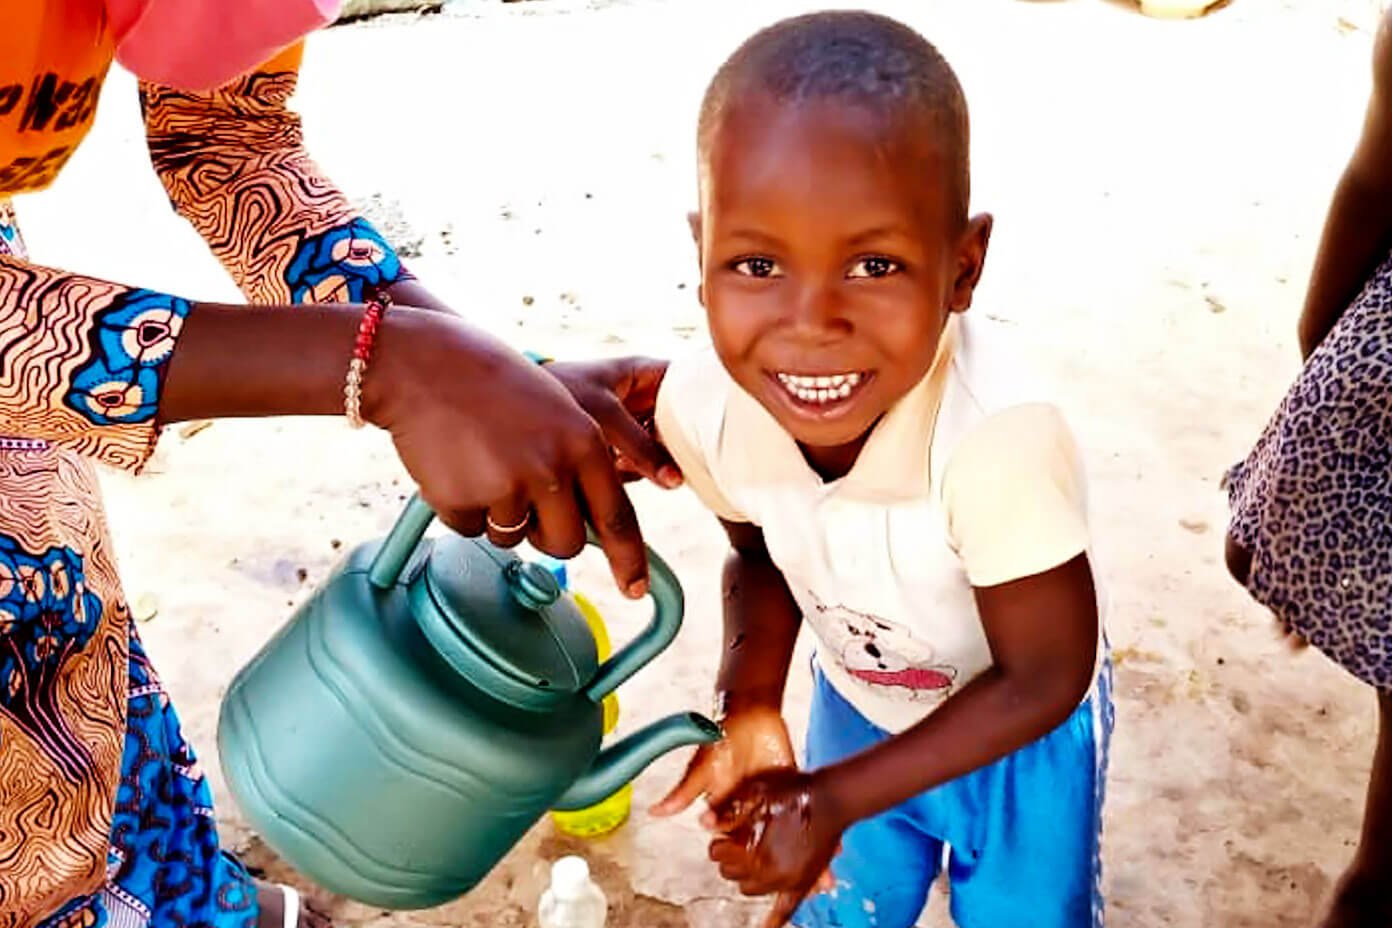 Young boy in Mali washing his hands with soap and clean water